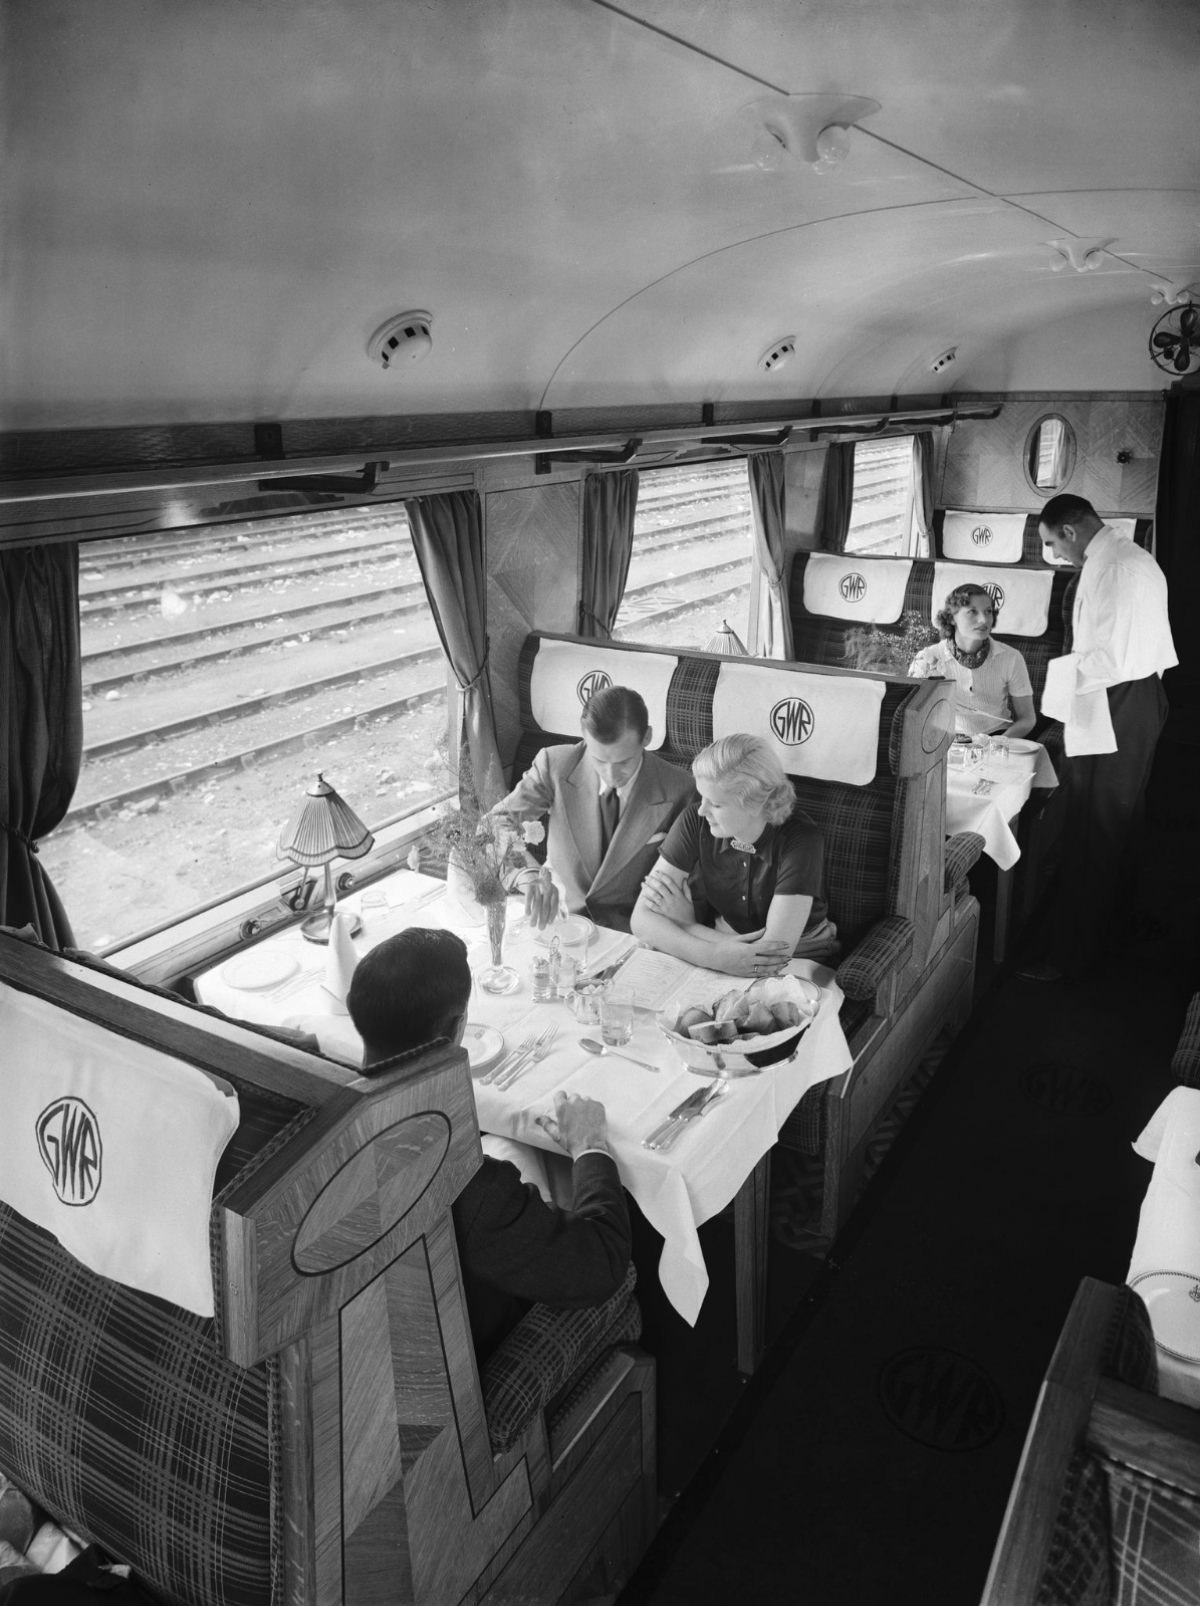 Passengers in a first class Great Western Railway dining car, 1938.